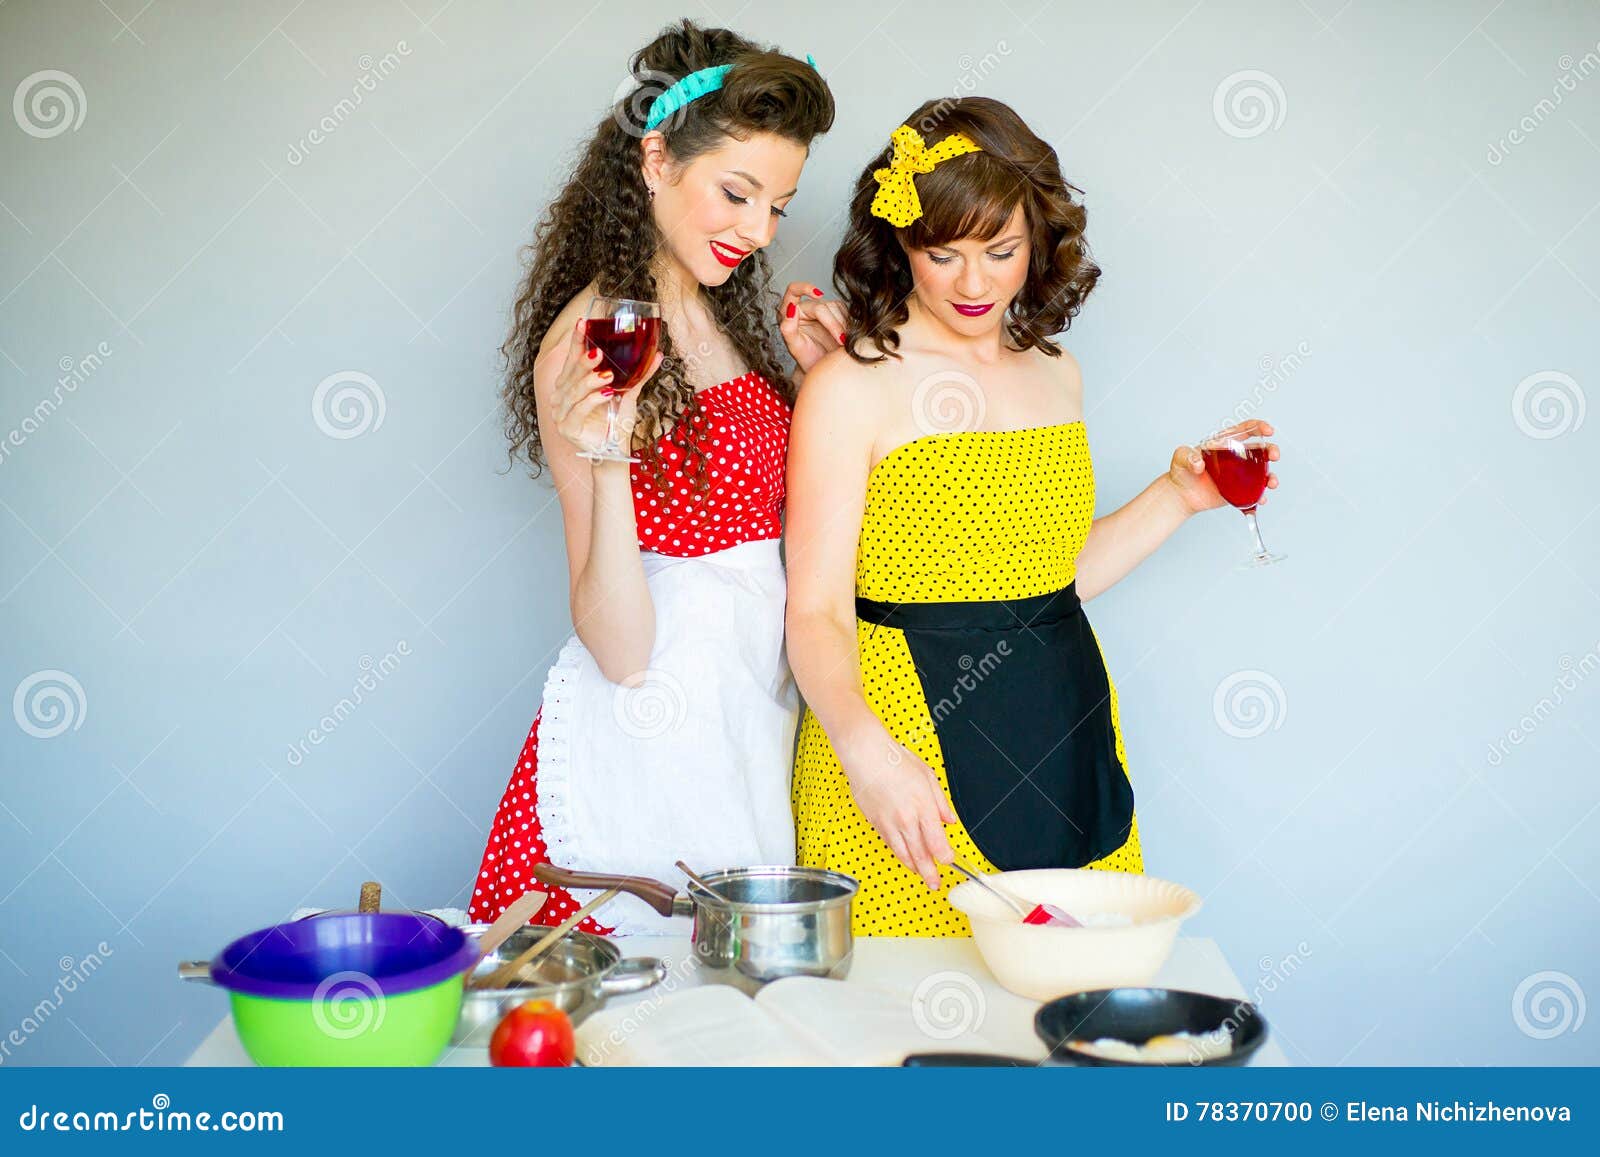 two housewifes change their